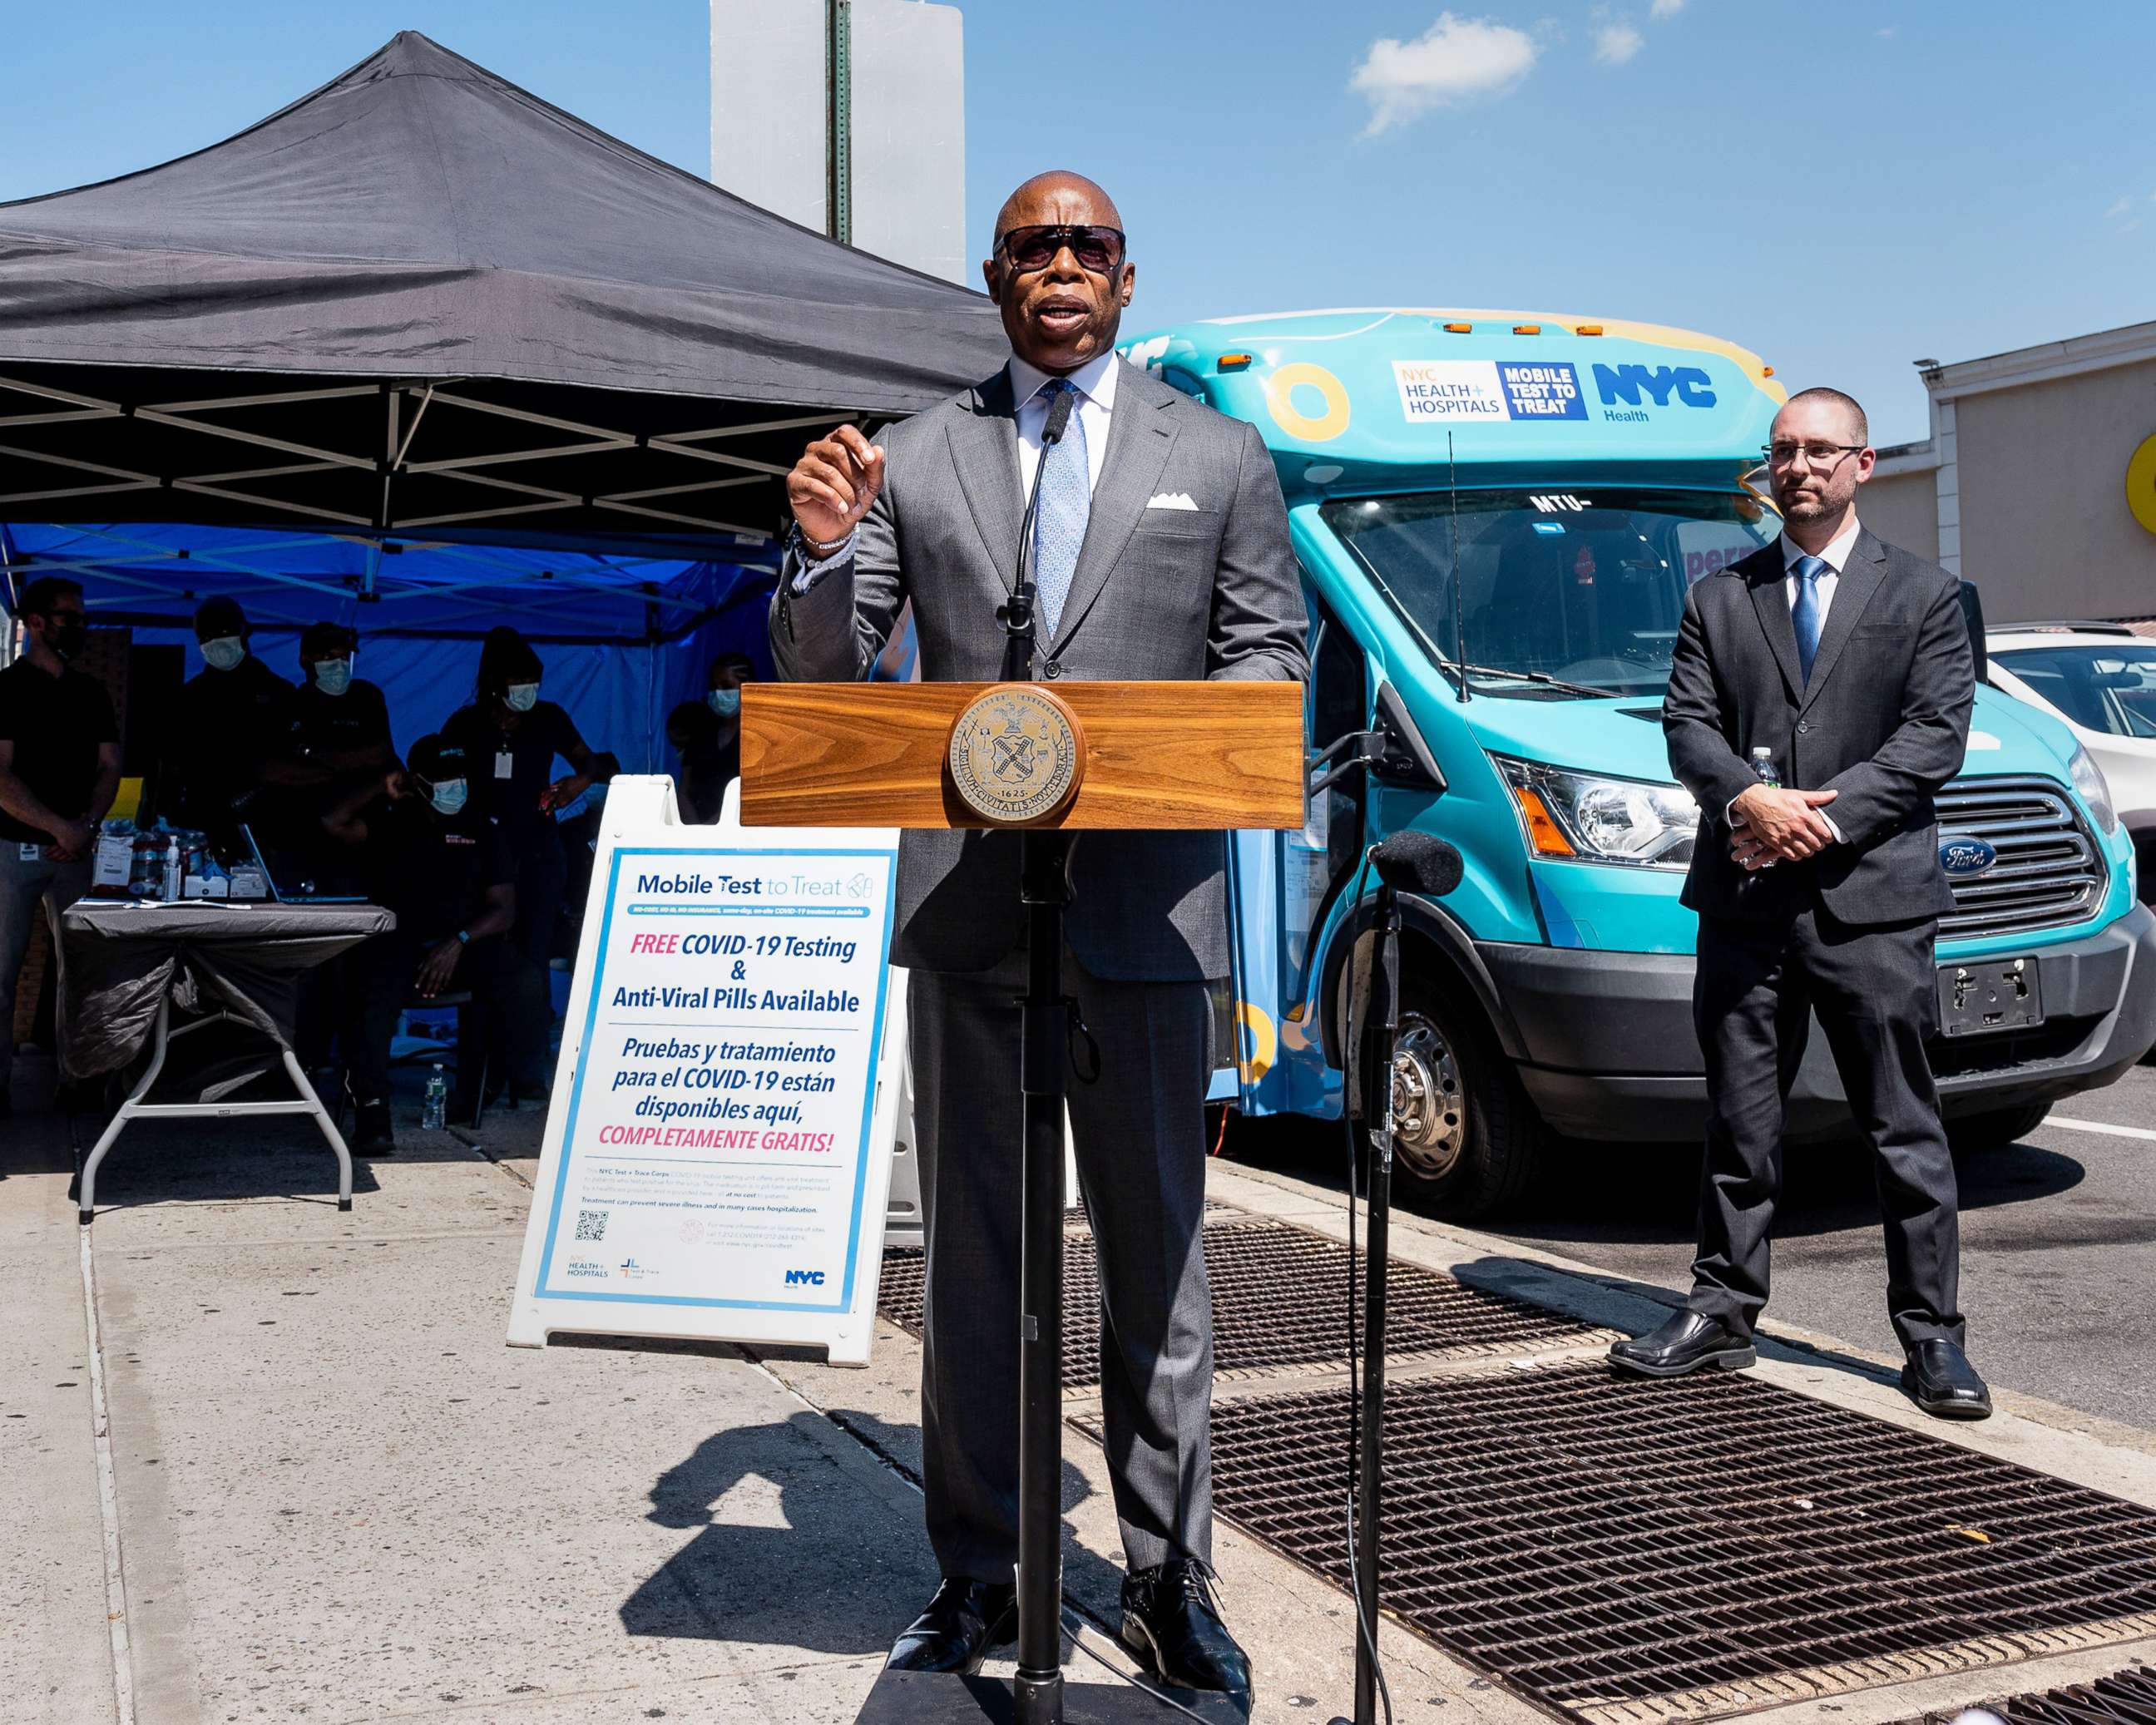 PHOTO: New York City Mayor Eric Adams speaks at a press conference about New York City's new mobile COVID-19 "Test To Treat" program, June 30, 2022, in New York.